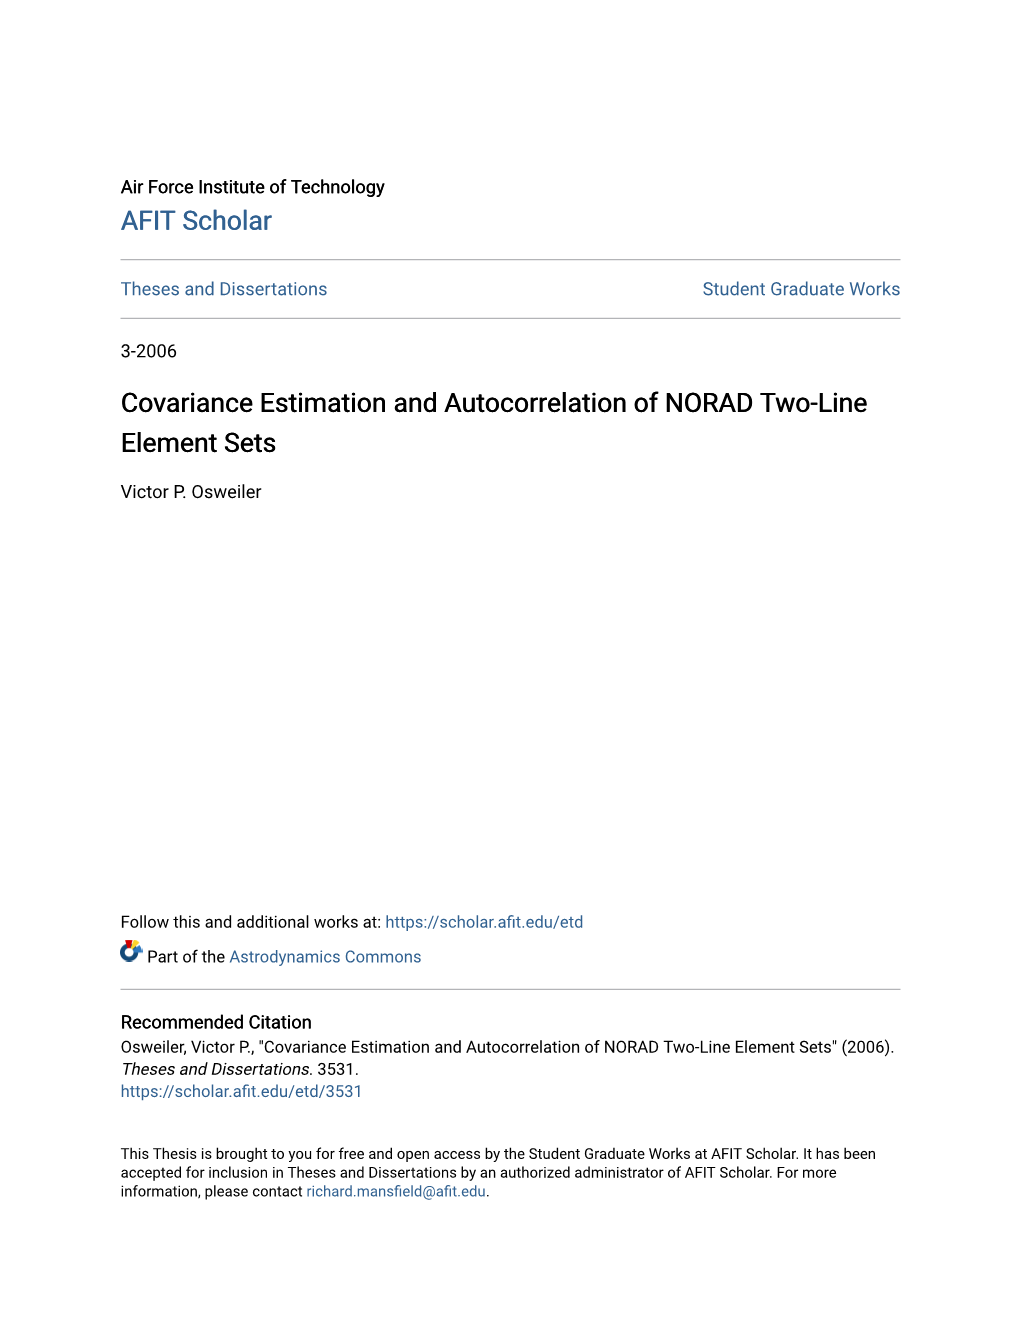 Covariance Estimation and Autocorrelation of NORAD Two-Line Element Sets